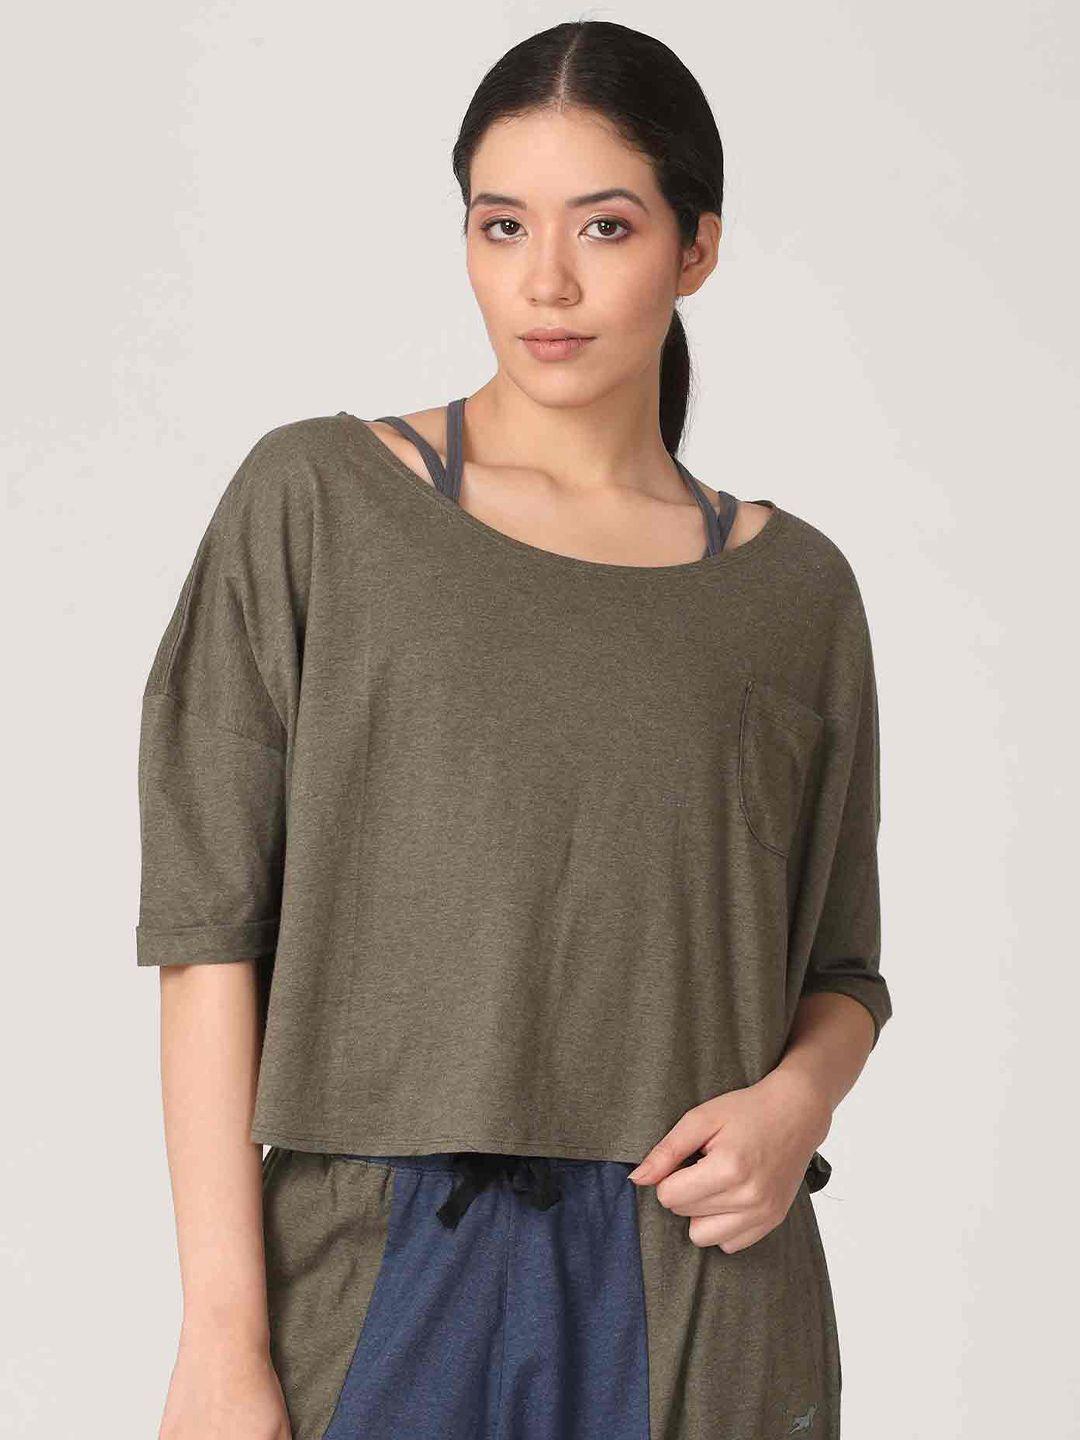 proyog olive green extended sleeves organic cotton boxy top